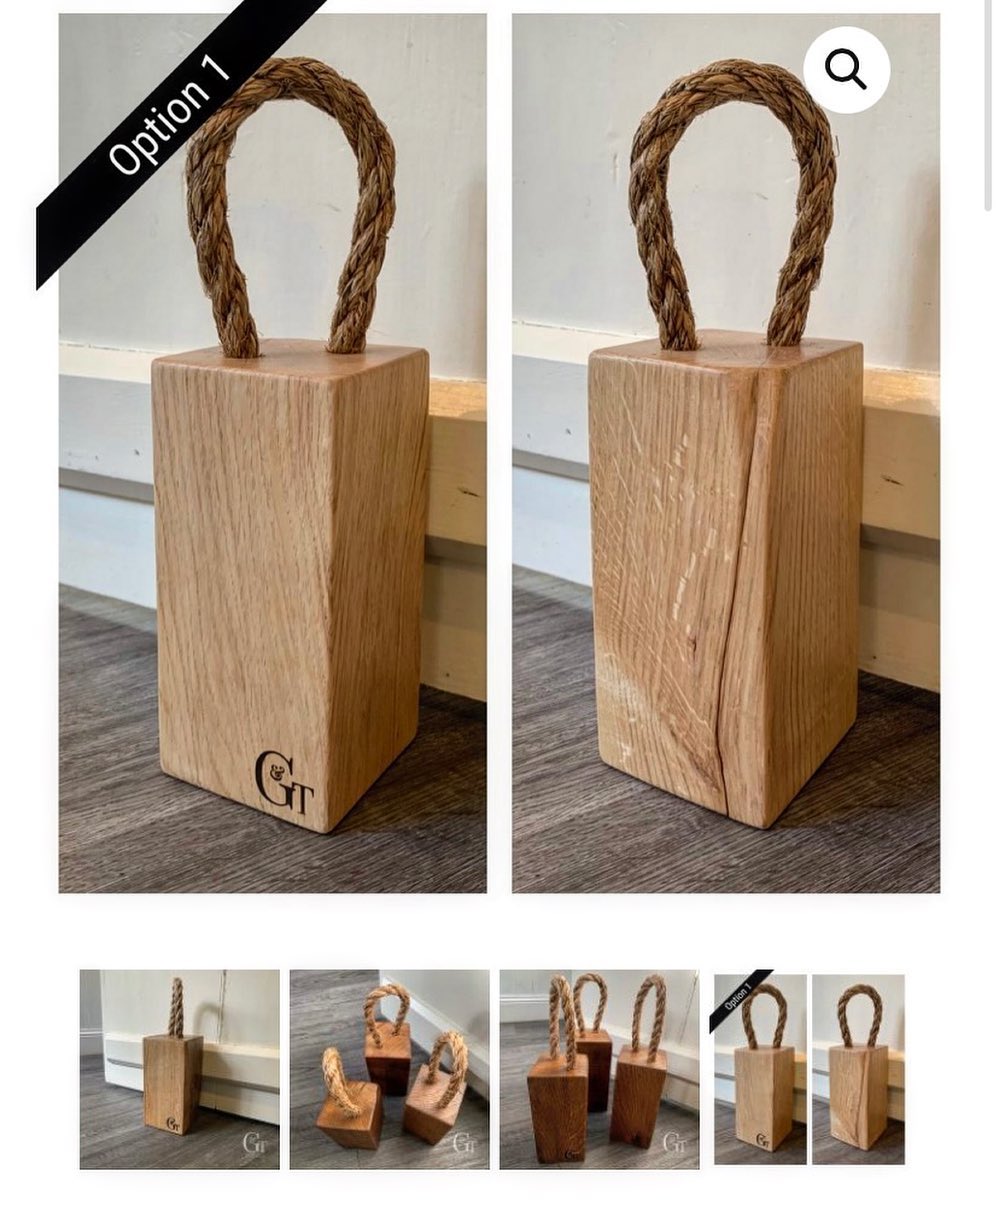 We now have some new doorstop options to choose from online. Head over to Gingerandtweed.com and browse our Extra Character Solid Oak Door Stops- available with Rope or Ring handle and in standard or large sizes. From £19 plus shipping#newproduct #shop #dooatop #oak #handcrafted #homewares #housewarming #giftideas #simplehomestyle #reclaimed #rustic #extracharacter #gingerandtweed